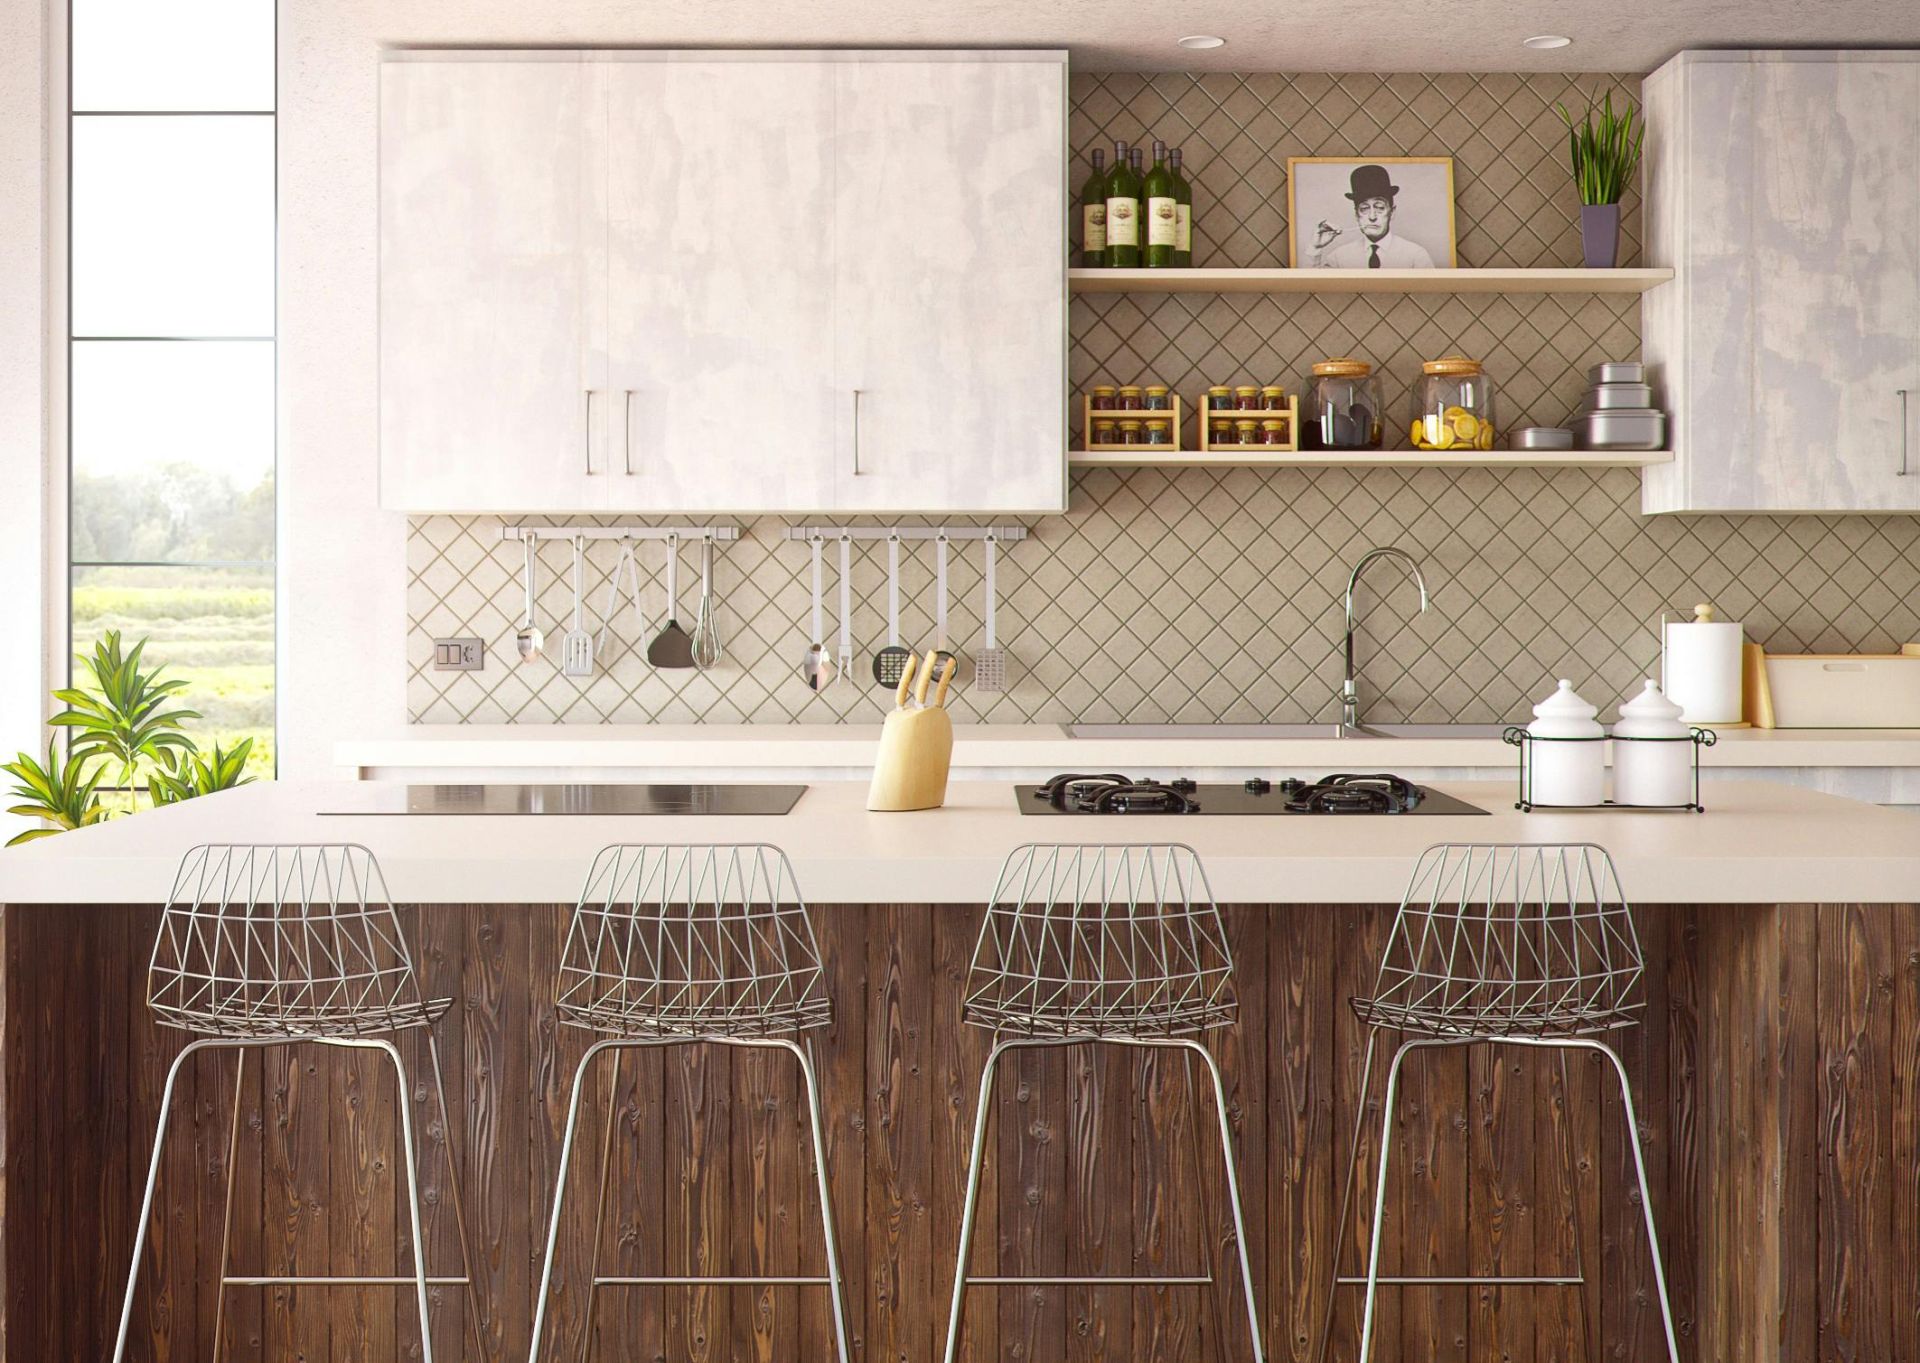 Four Gray Bar Stools in Front of Kitchen Countertop